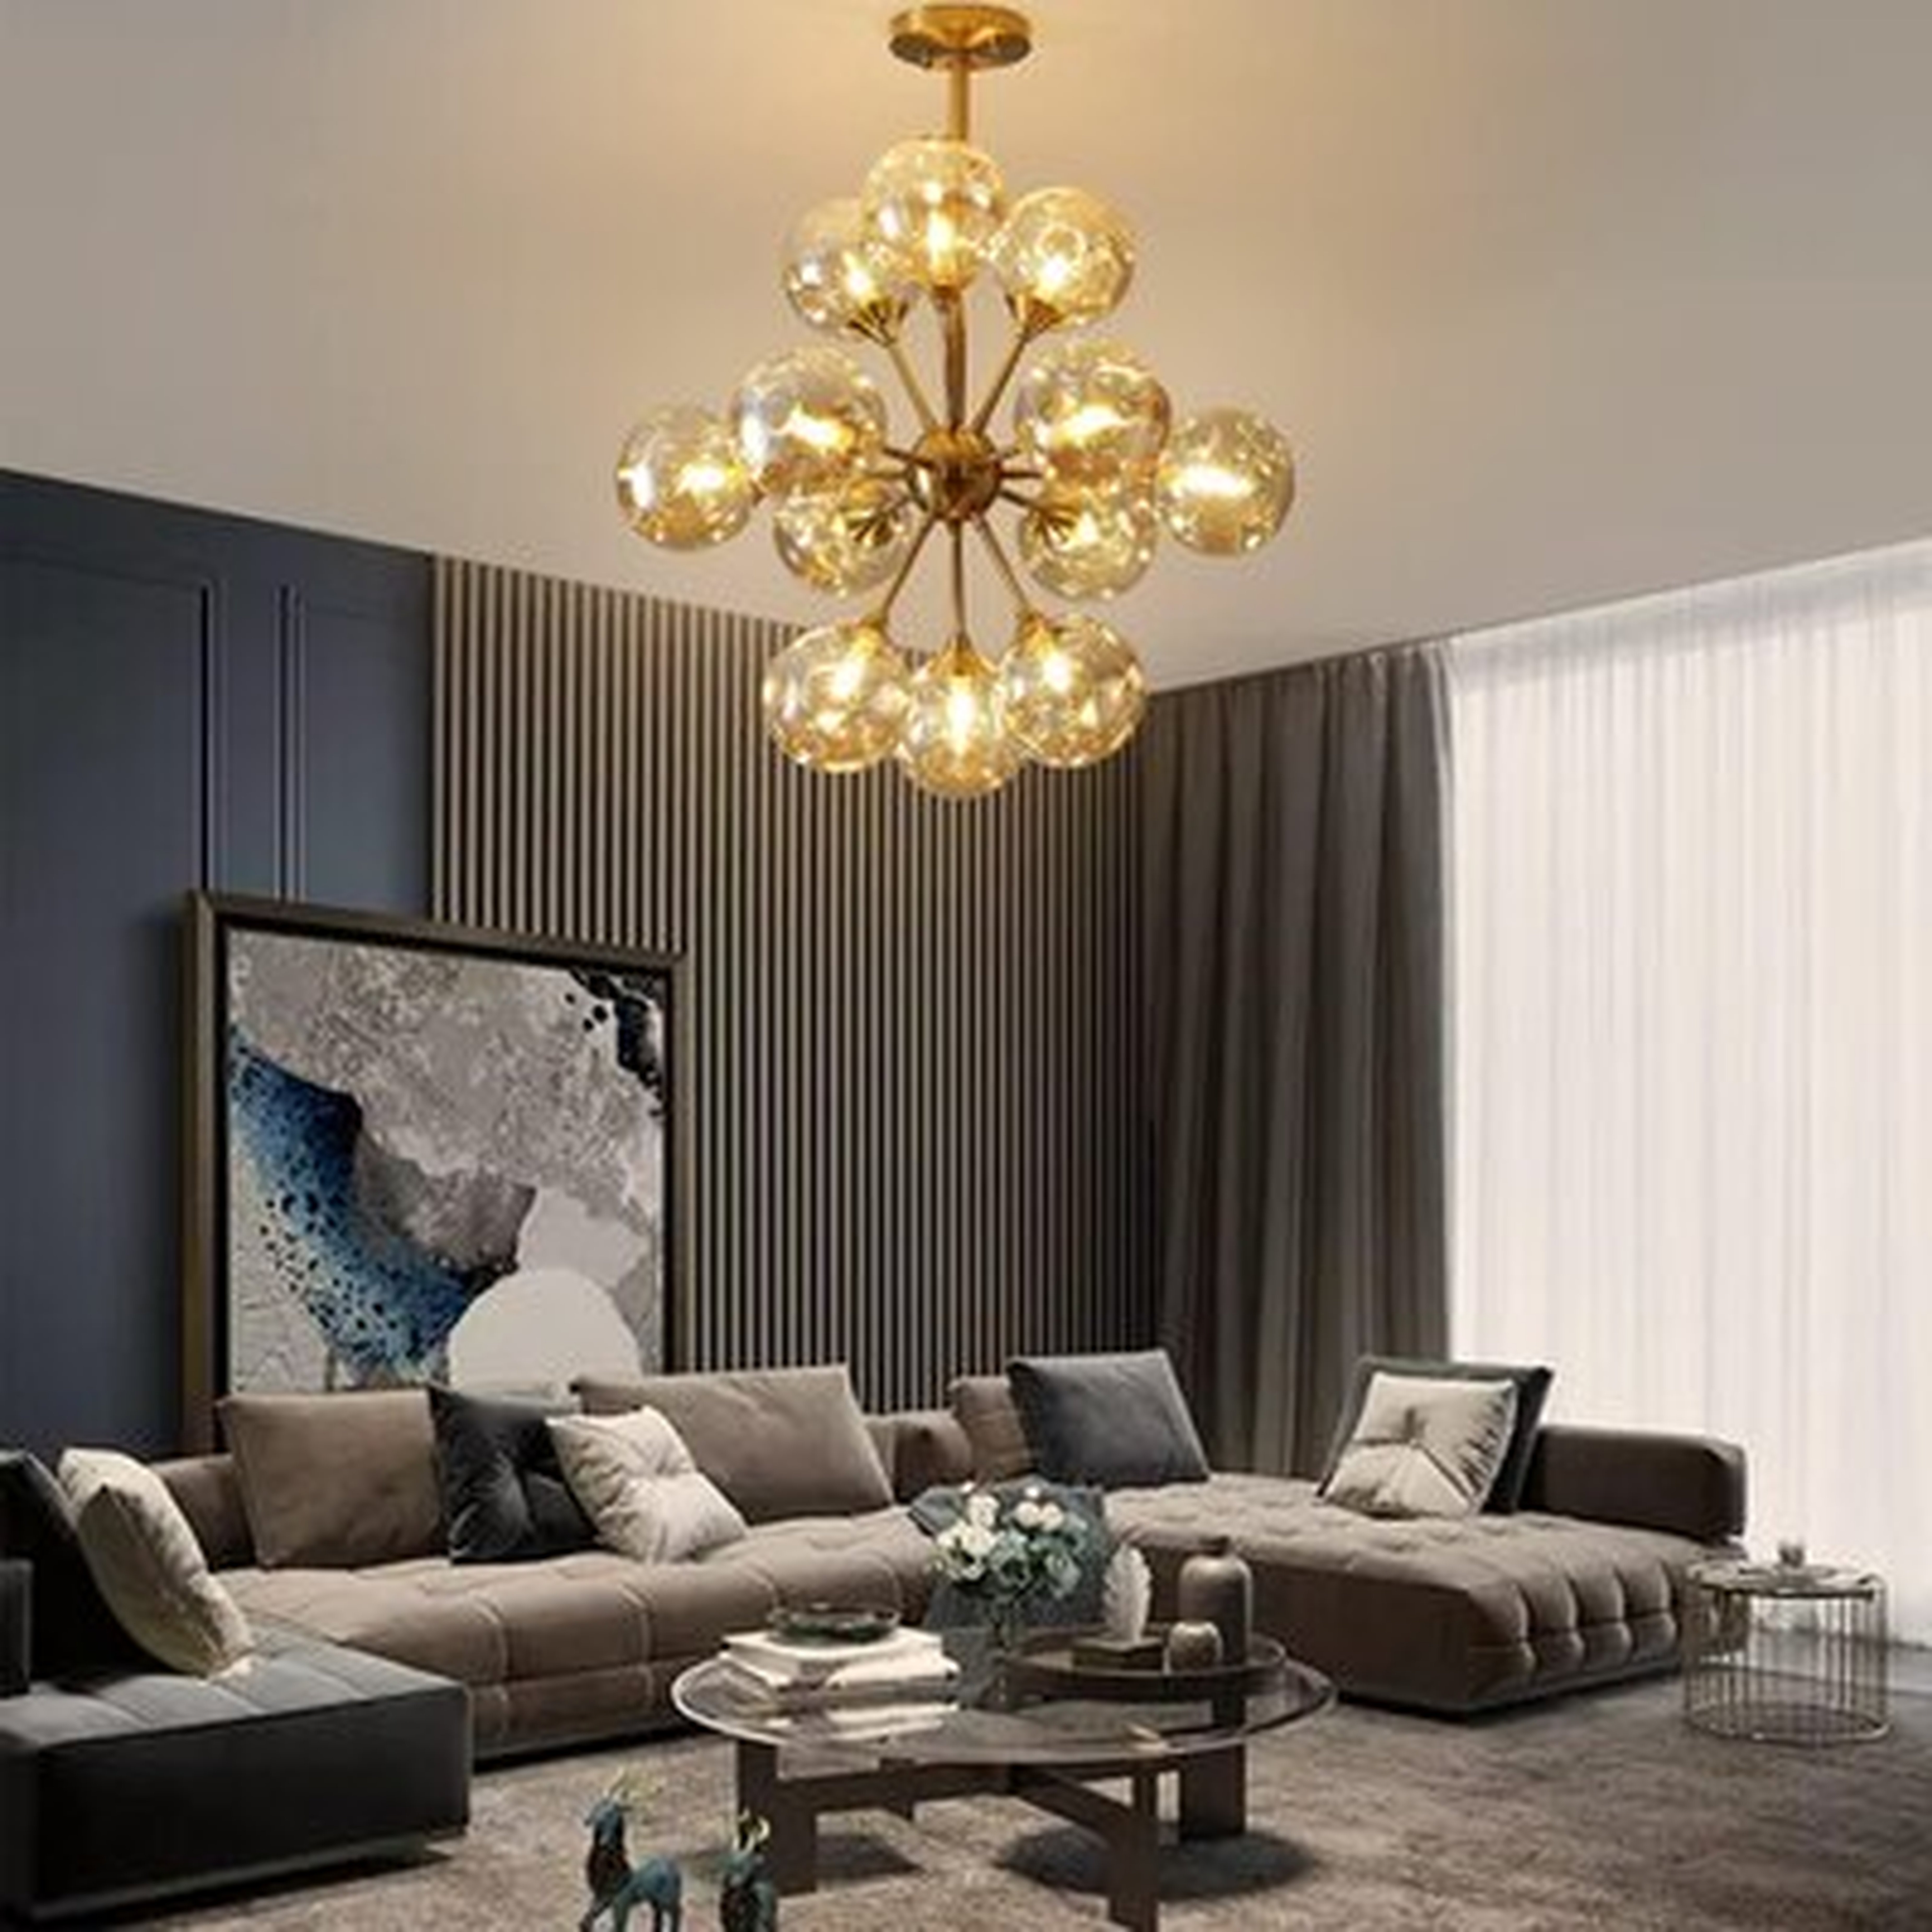 Gold Globe Chandeliers, 12-Light Modern Pendant Lighting Fixtures With Open Glass Shades For Living Room, Bedroom And Kitchen - Wayfair